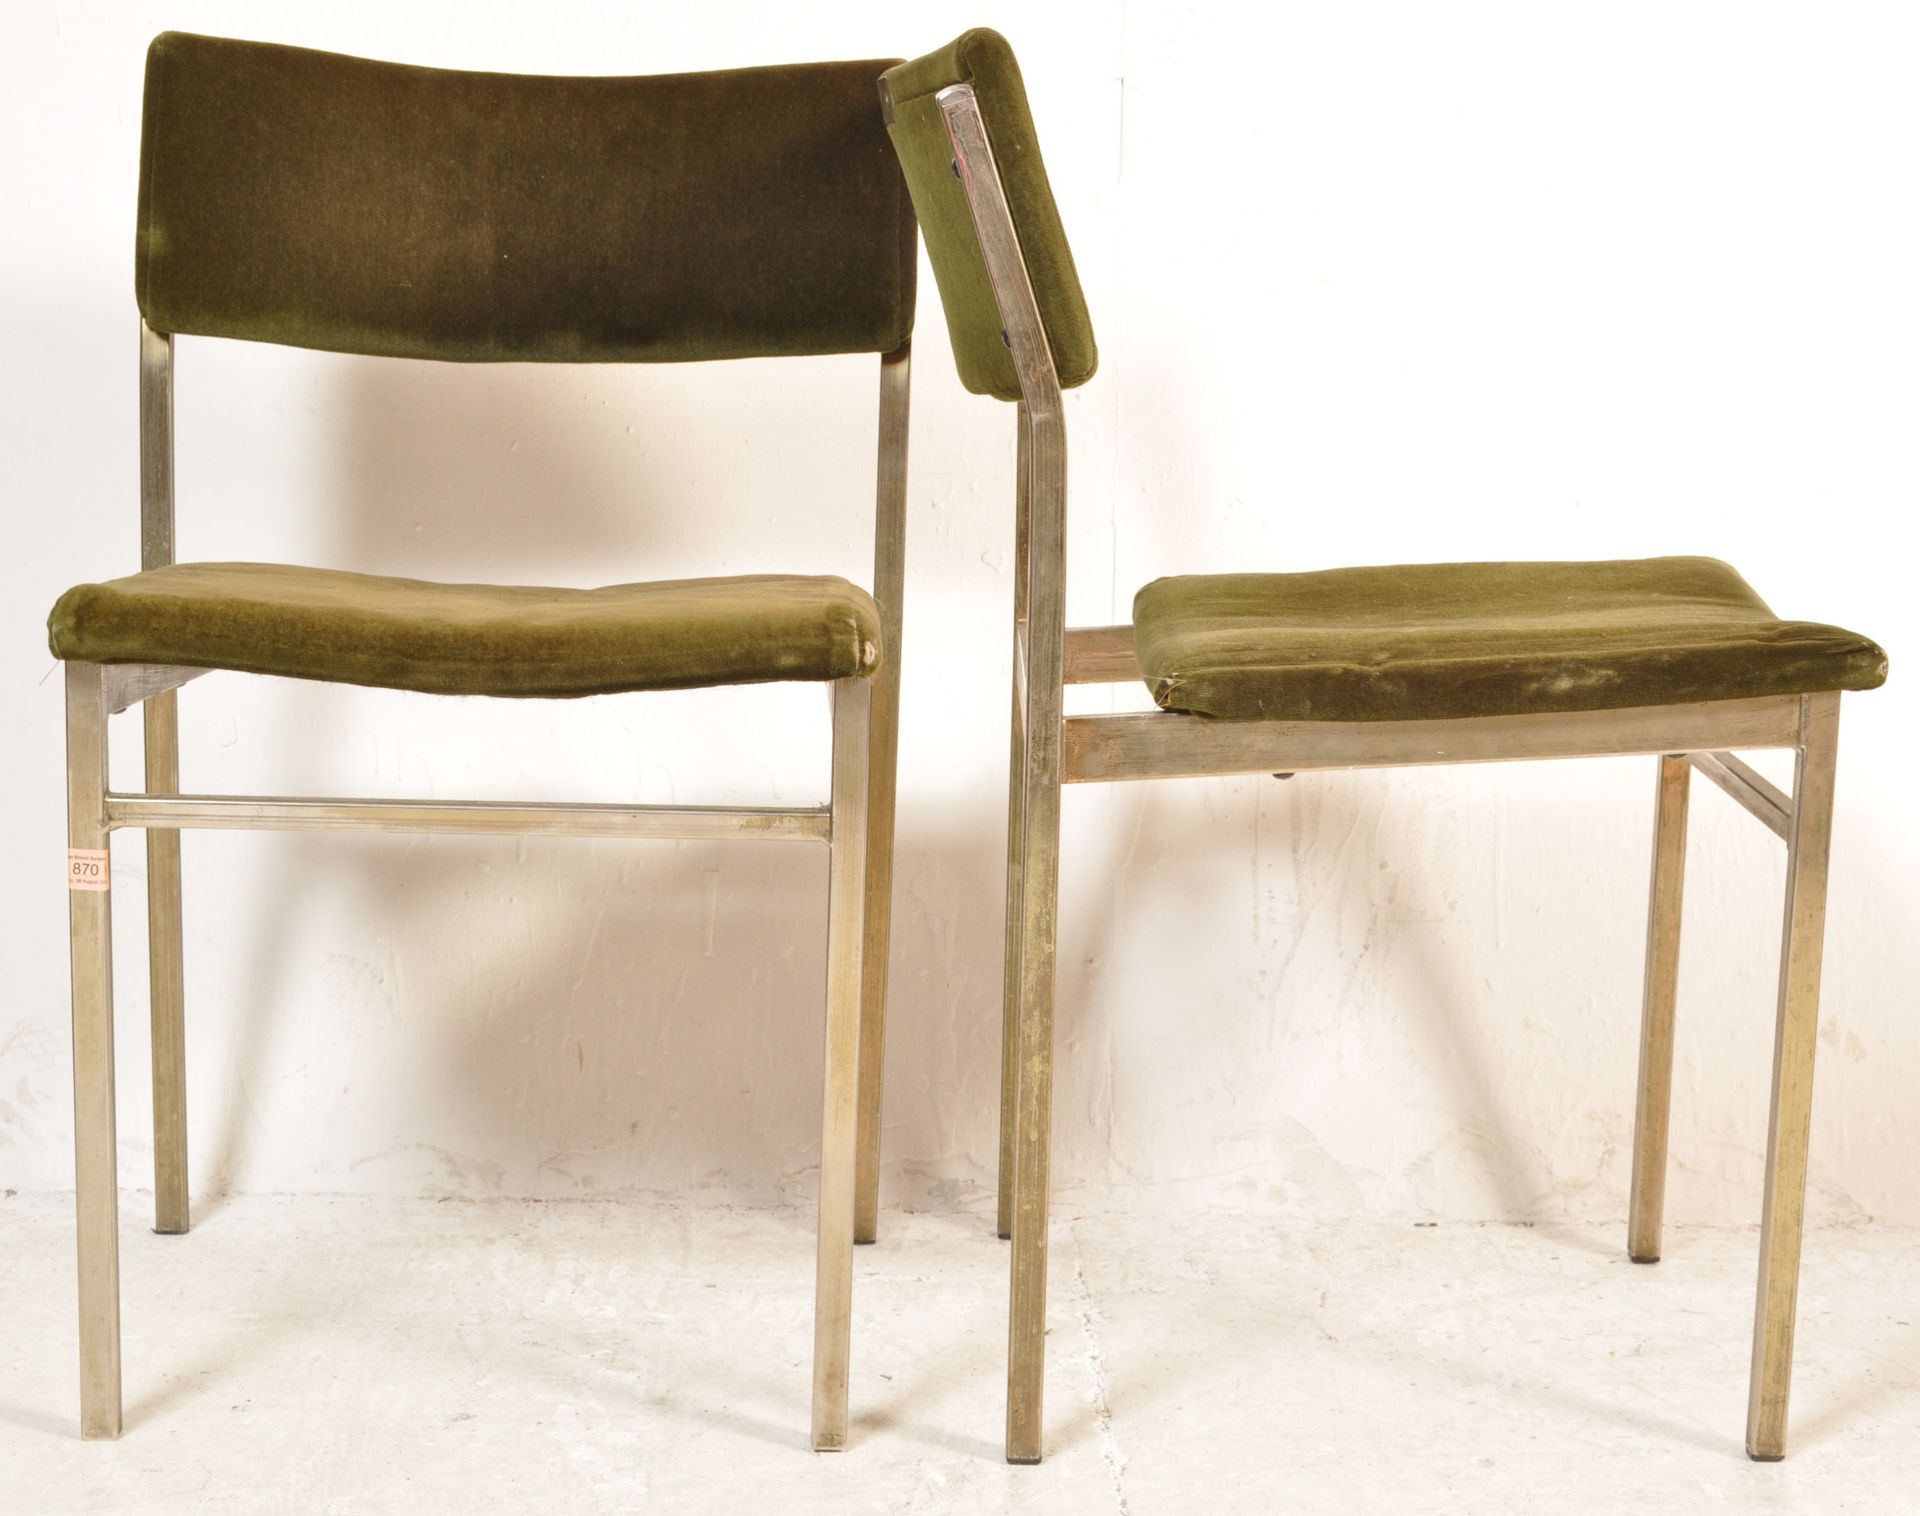 FOUR VINTAGE RETRO 20TH STACKING DINING CHAIRS. - Image 6 of 7